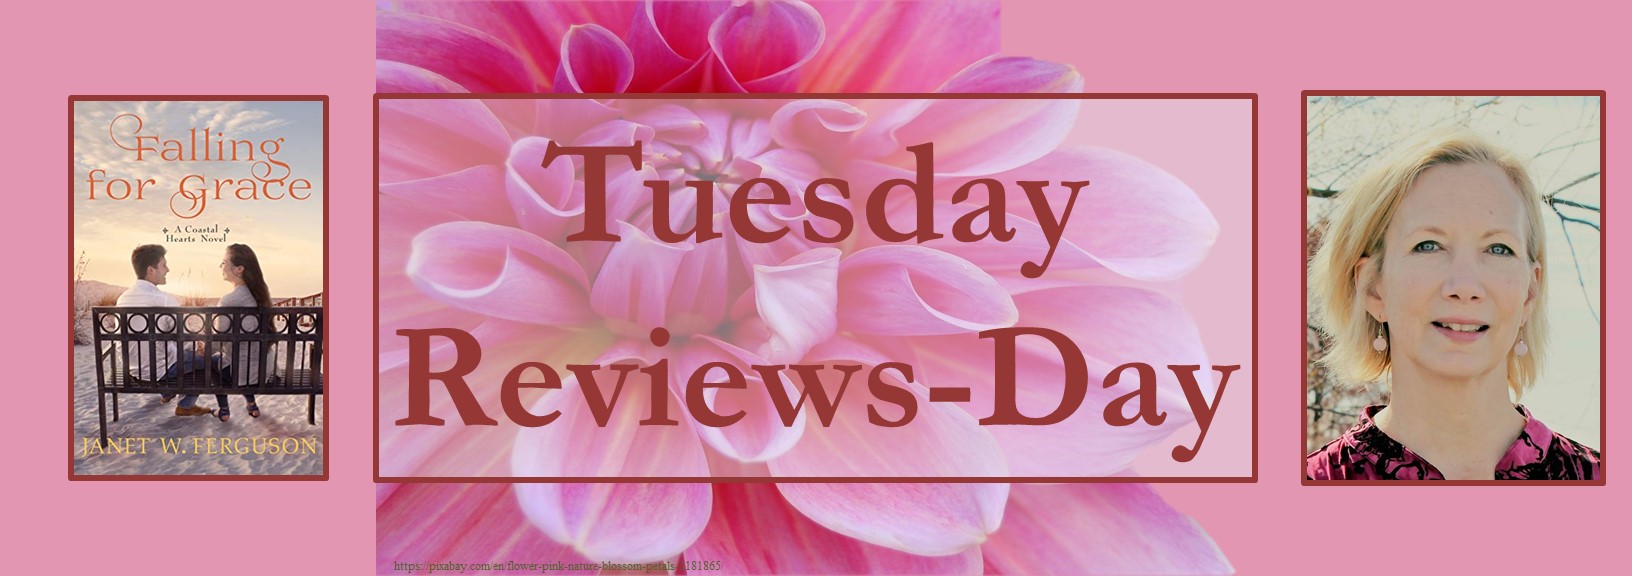 072820 - falling for grace - tuesday reviews day banner